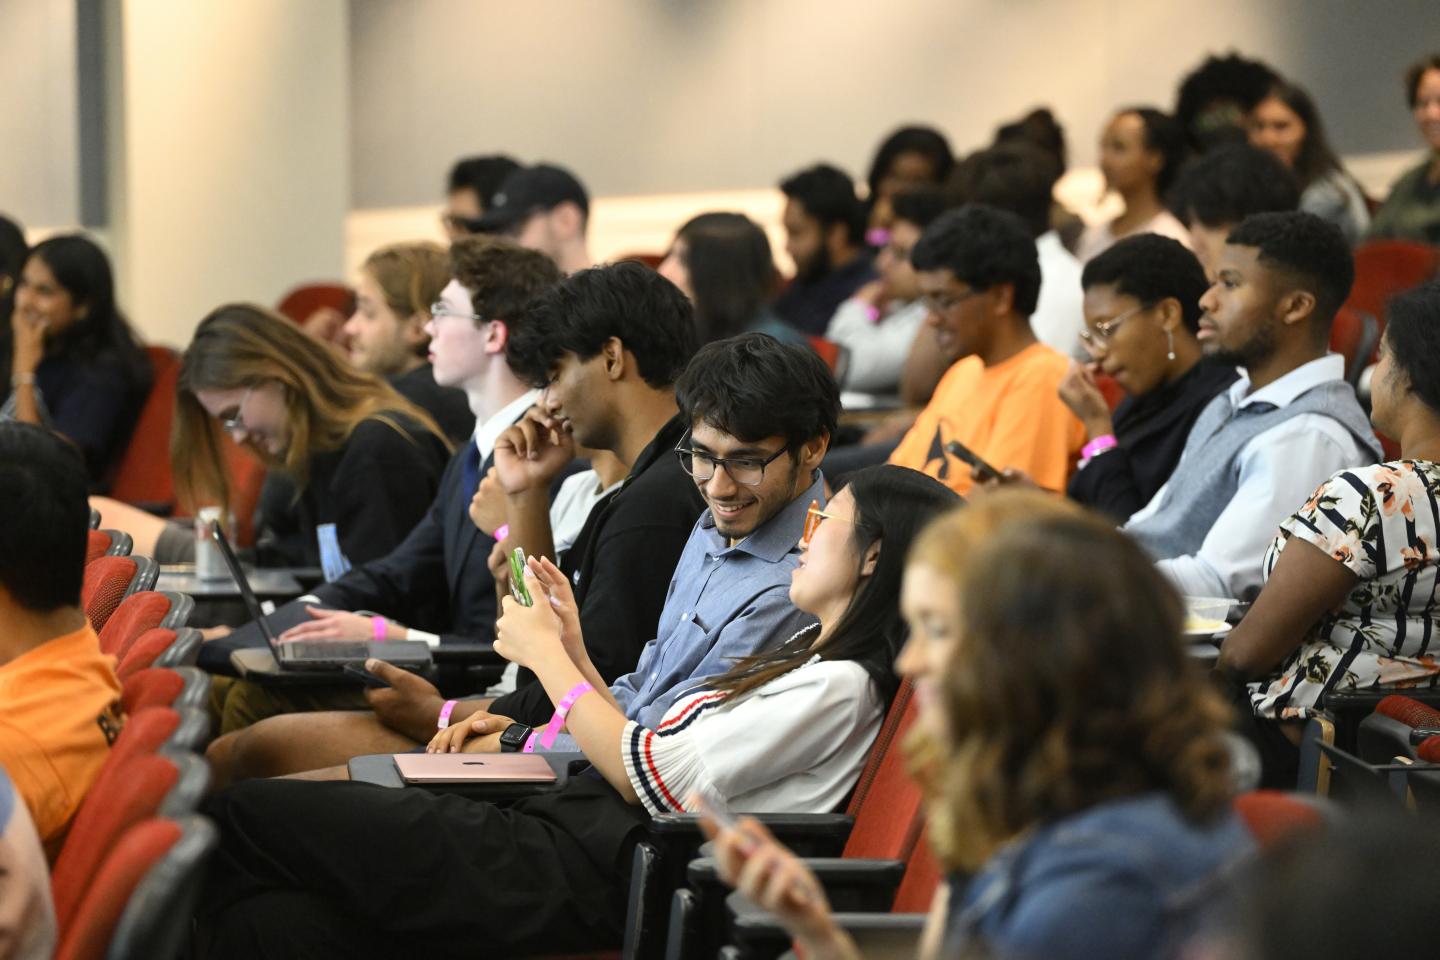 A crowd of students at HopHacks